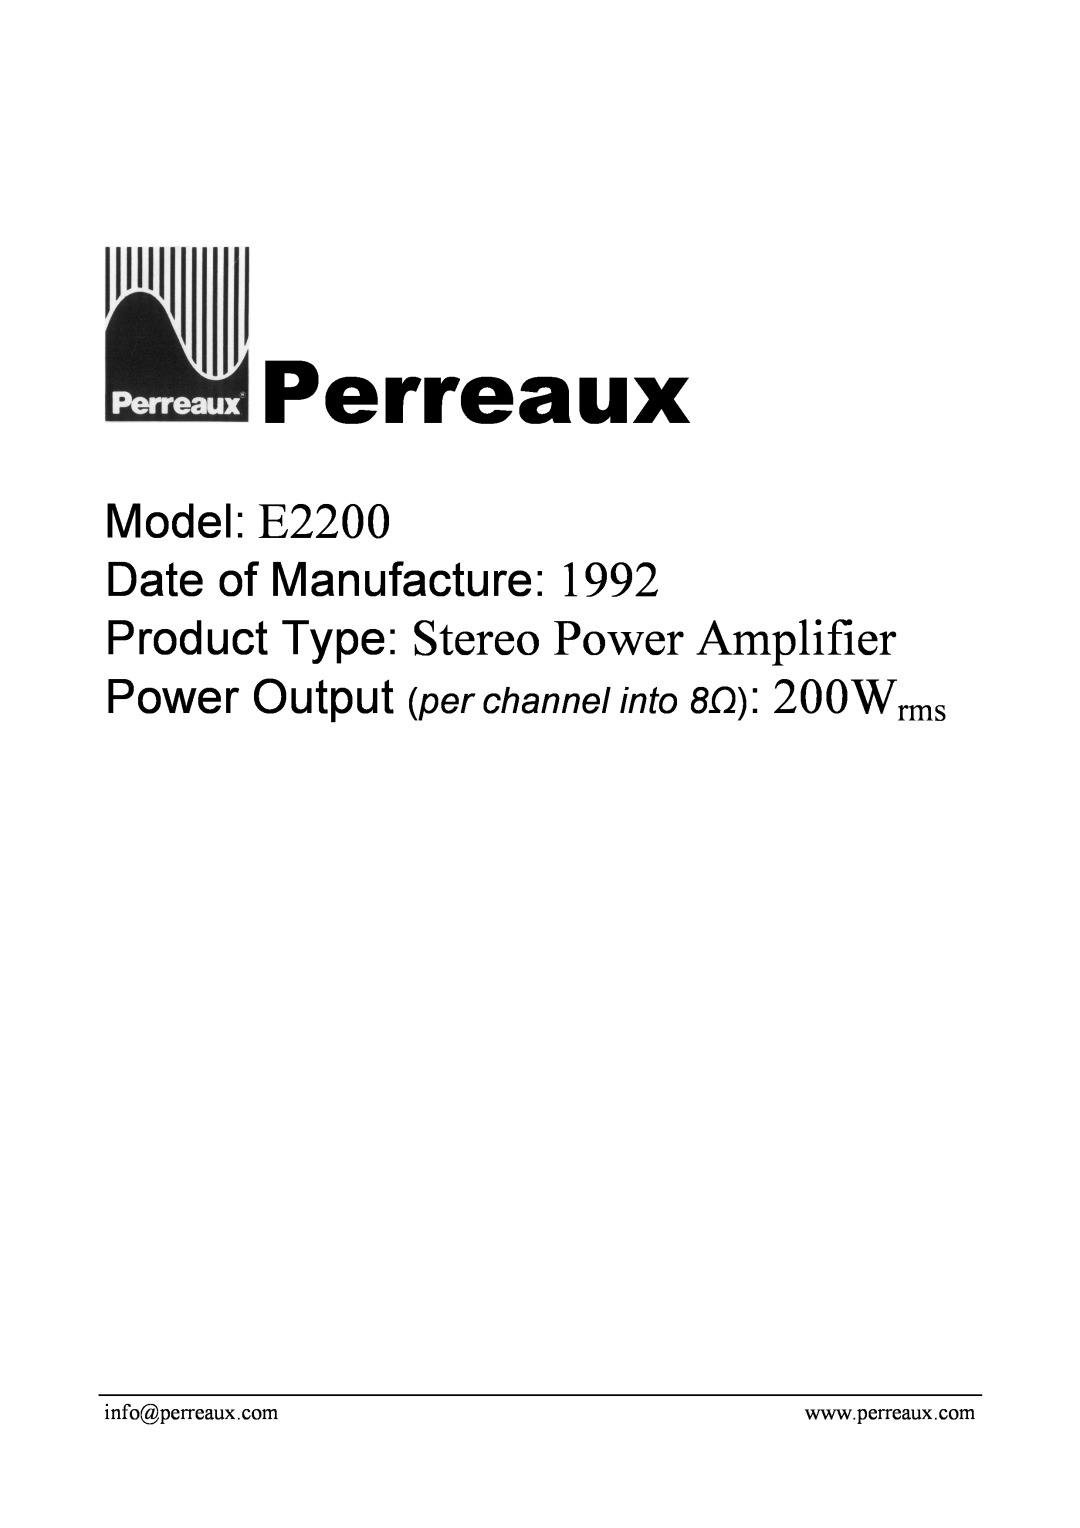 Perreaux manual Perreaux, Product Type Stereo Power Amplifier, Model E2200 Date of Manufacture 